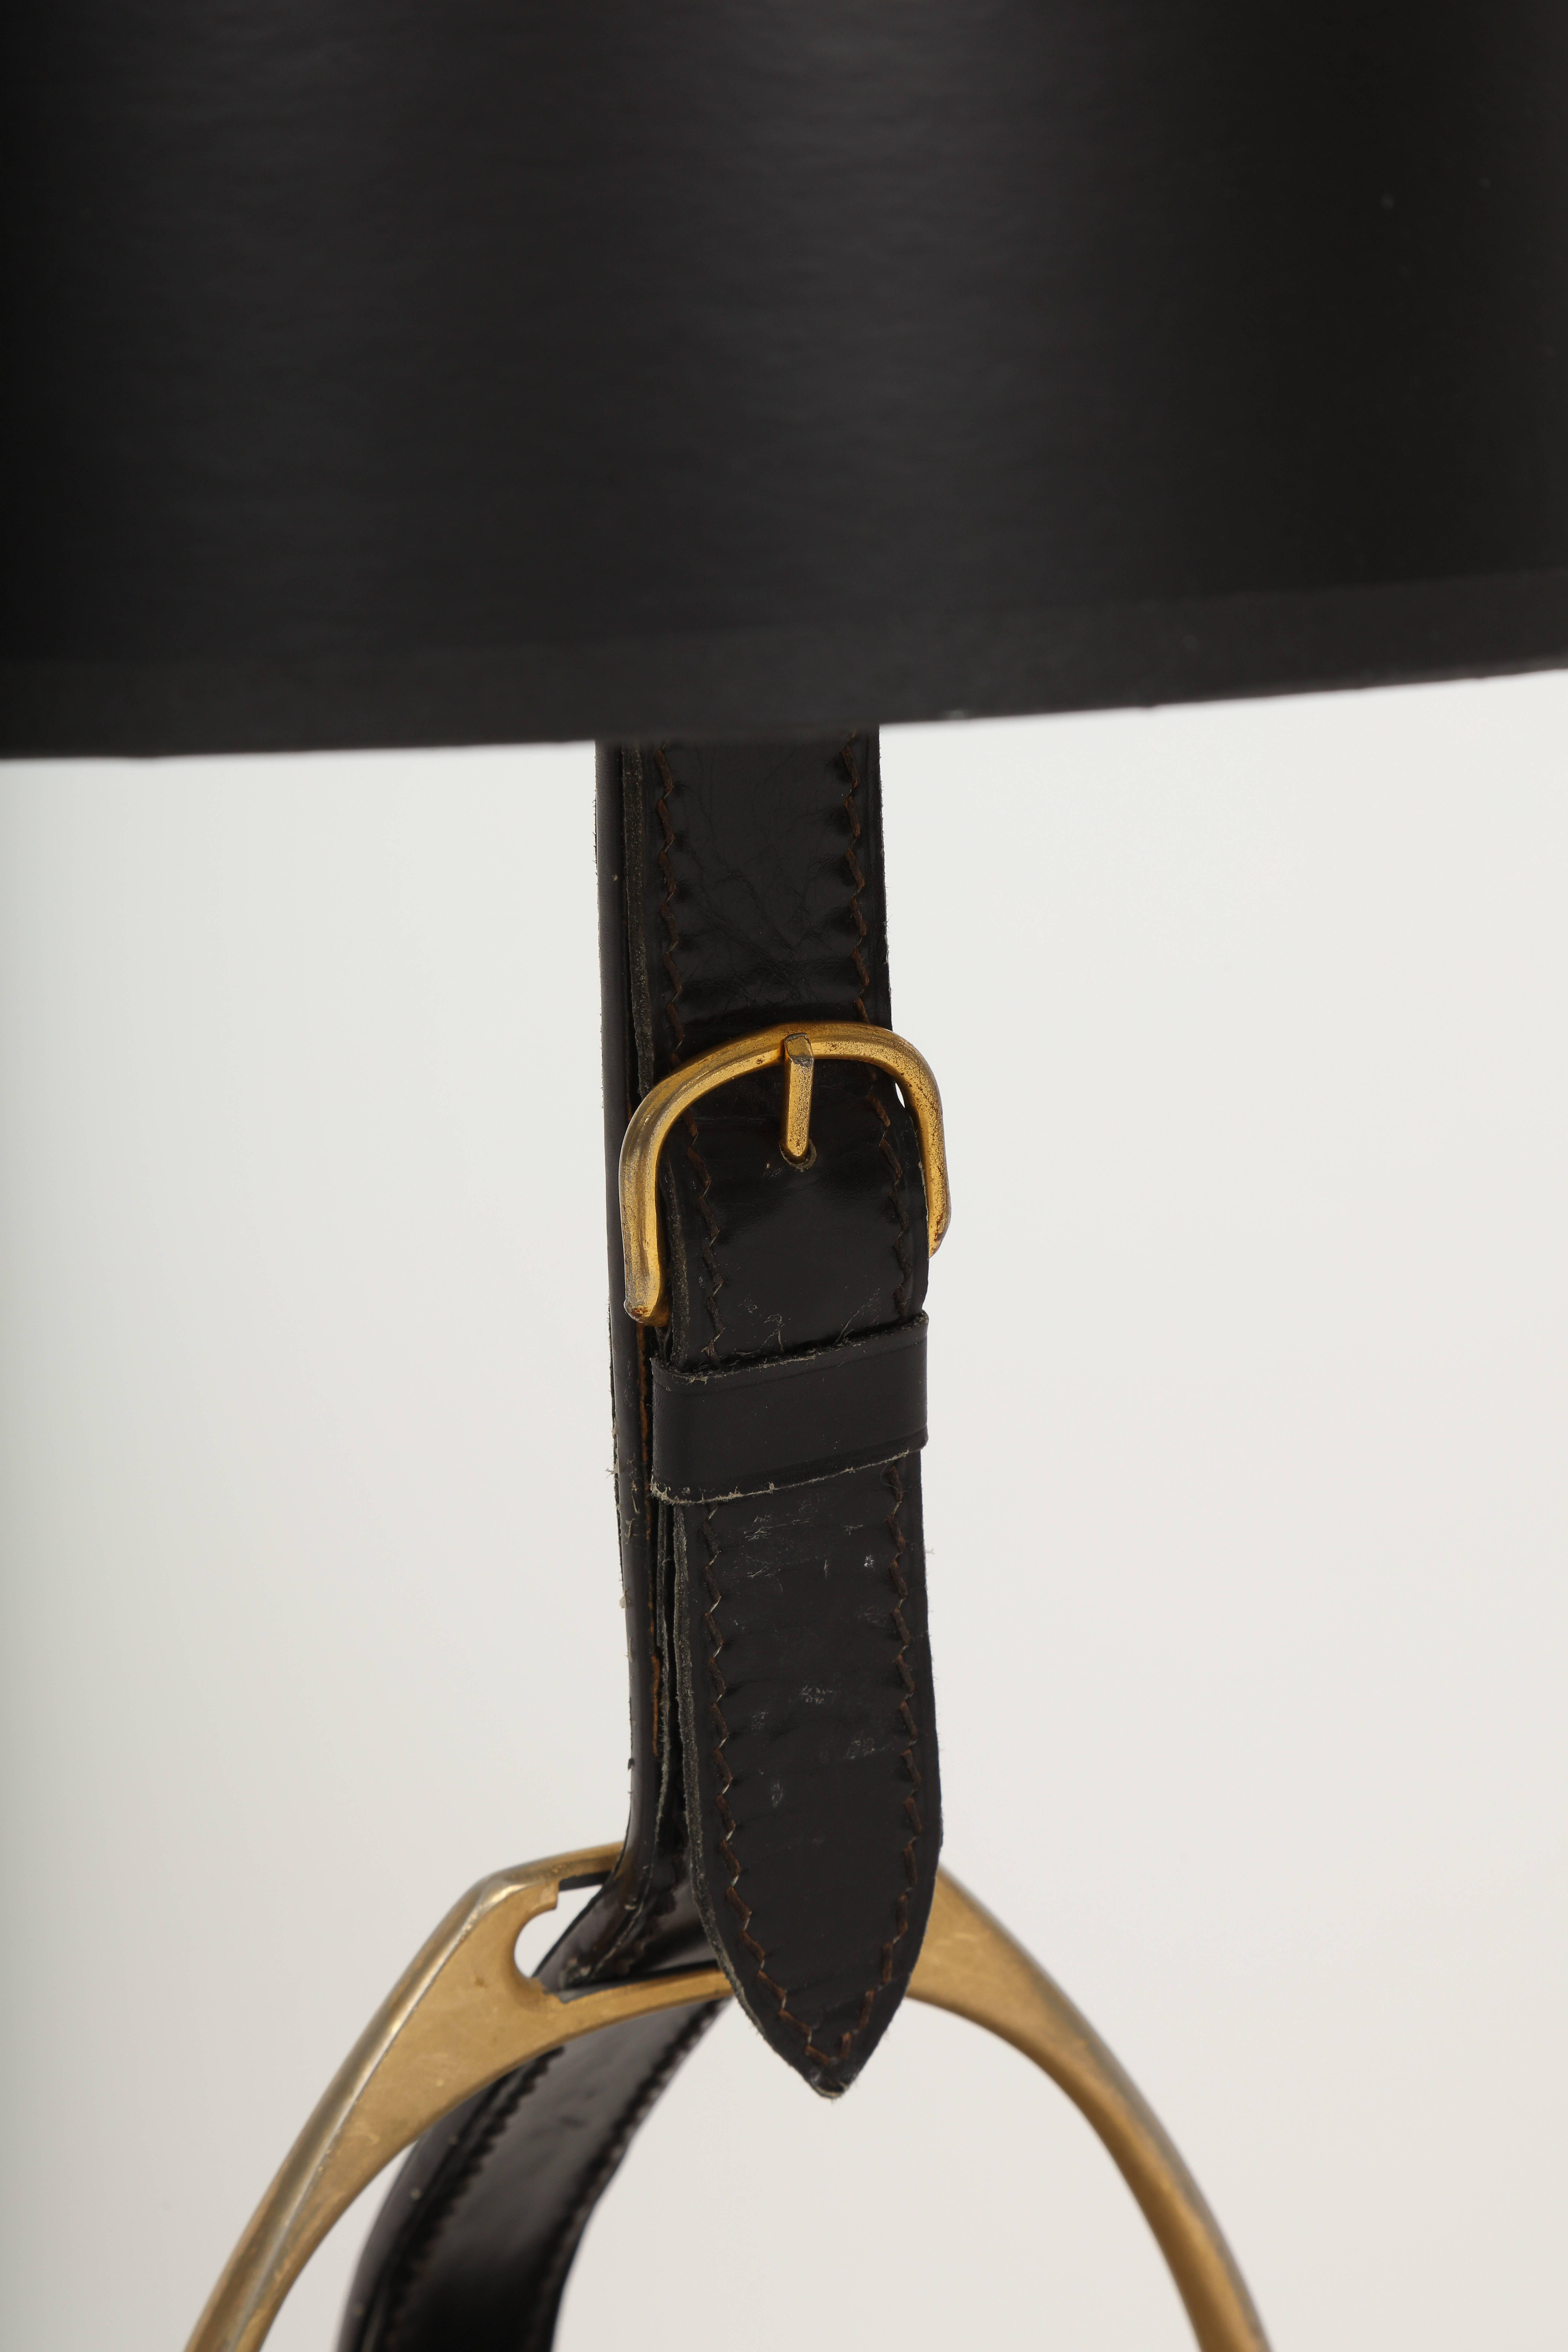 French Longchamp Equestrian Mid-Century Brass Leather Horse Buckle Lamp, 1950s France